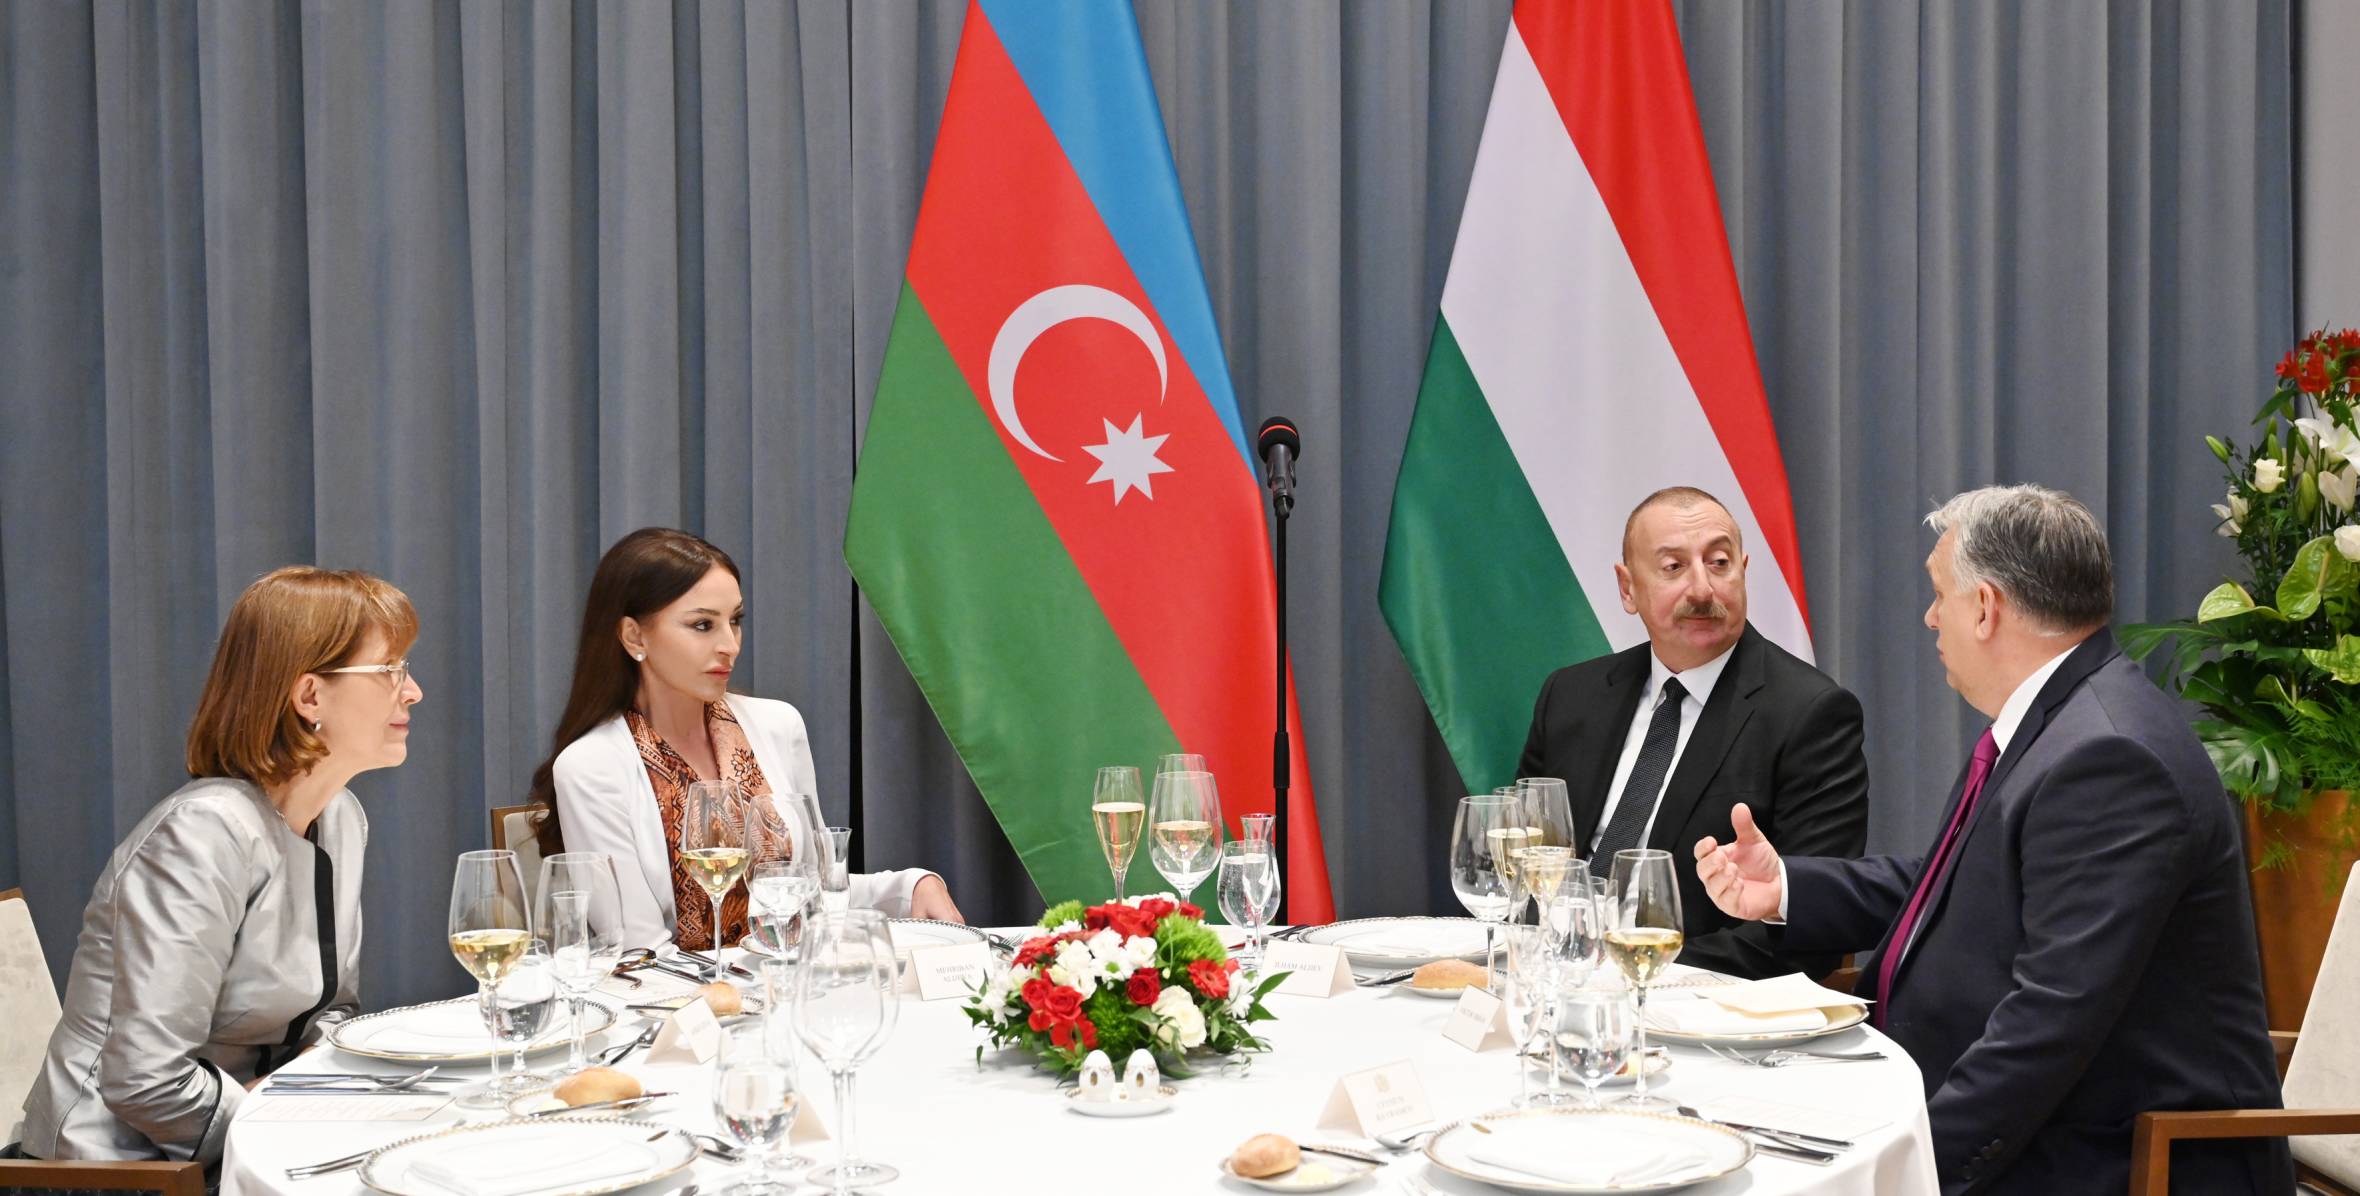 Official dinner was hosted in honor of President Ilham Aliyev and First Lady Mehriban Aliyeva in Budapest